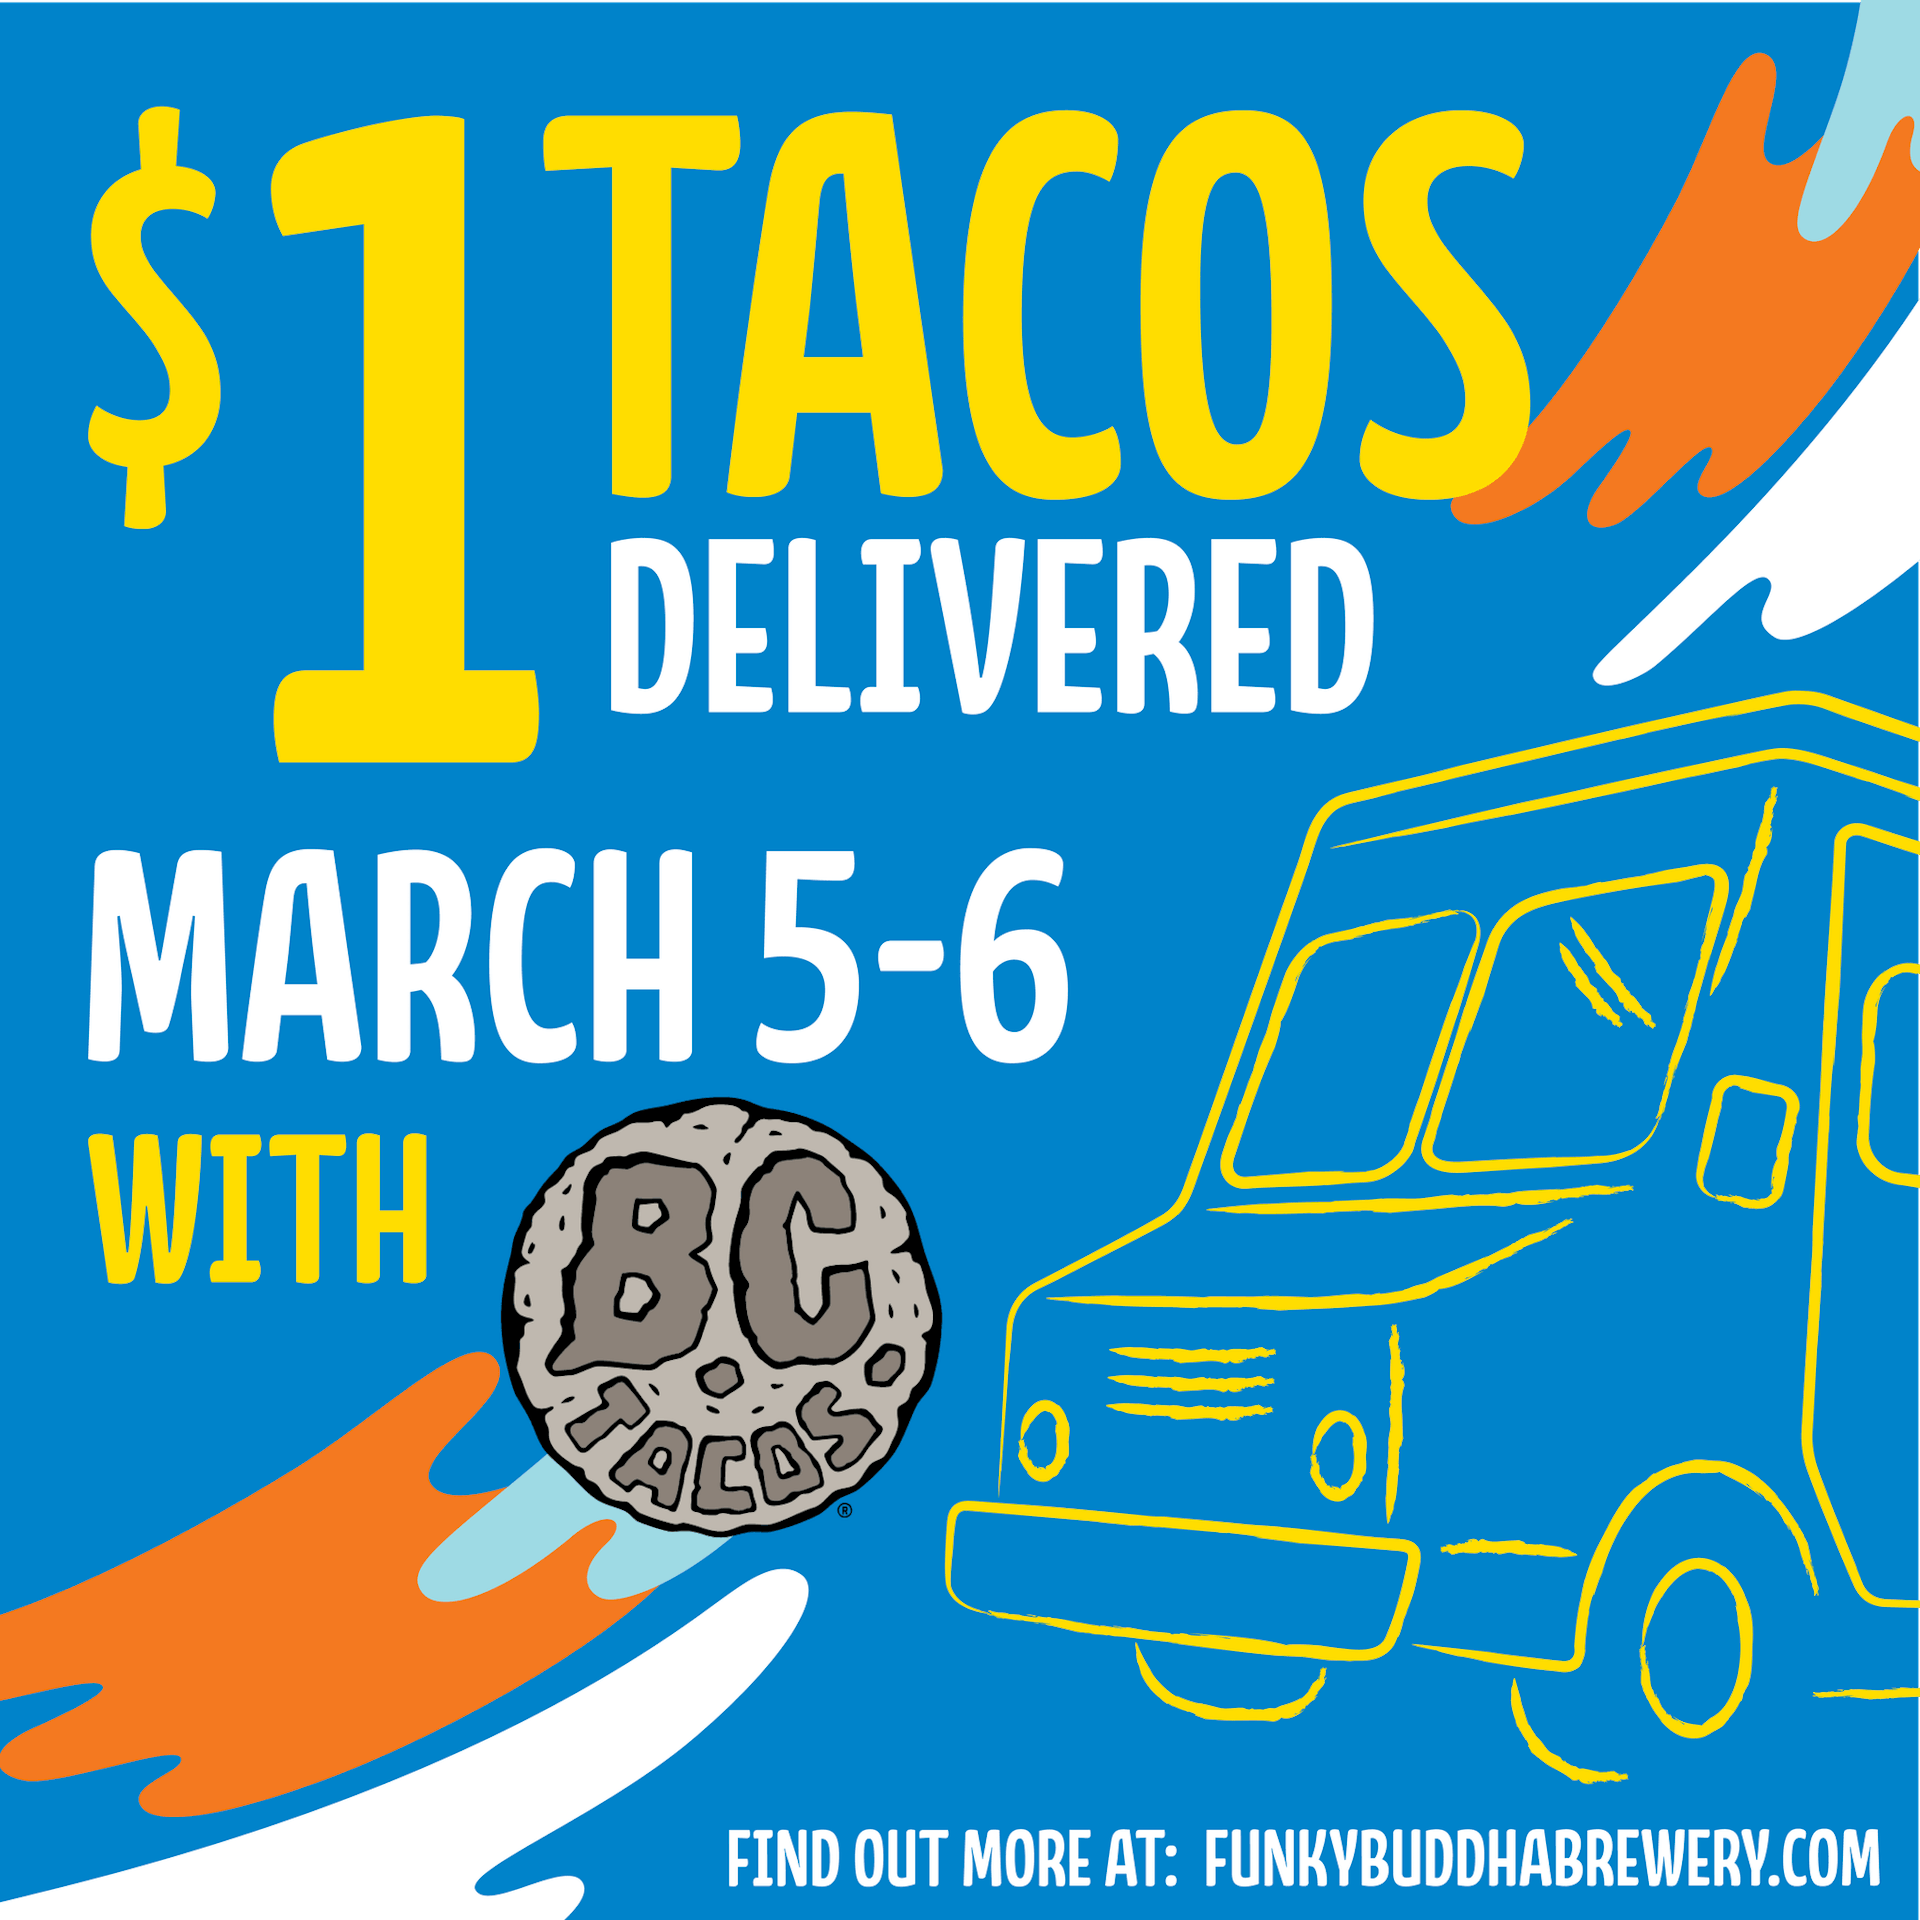 1$ tacos delivered March 5th-6th